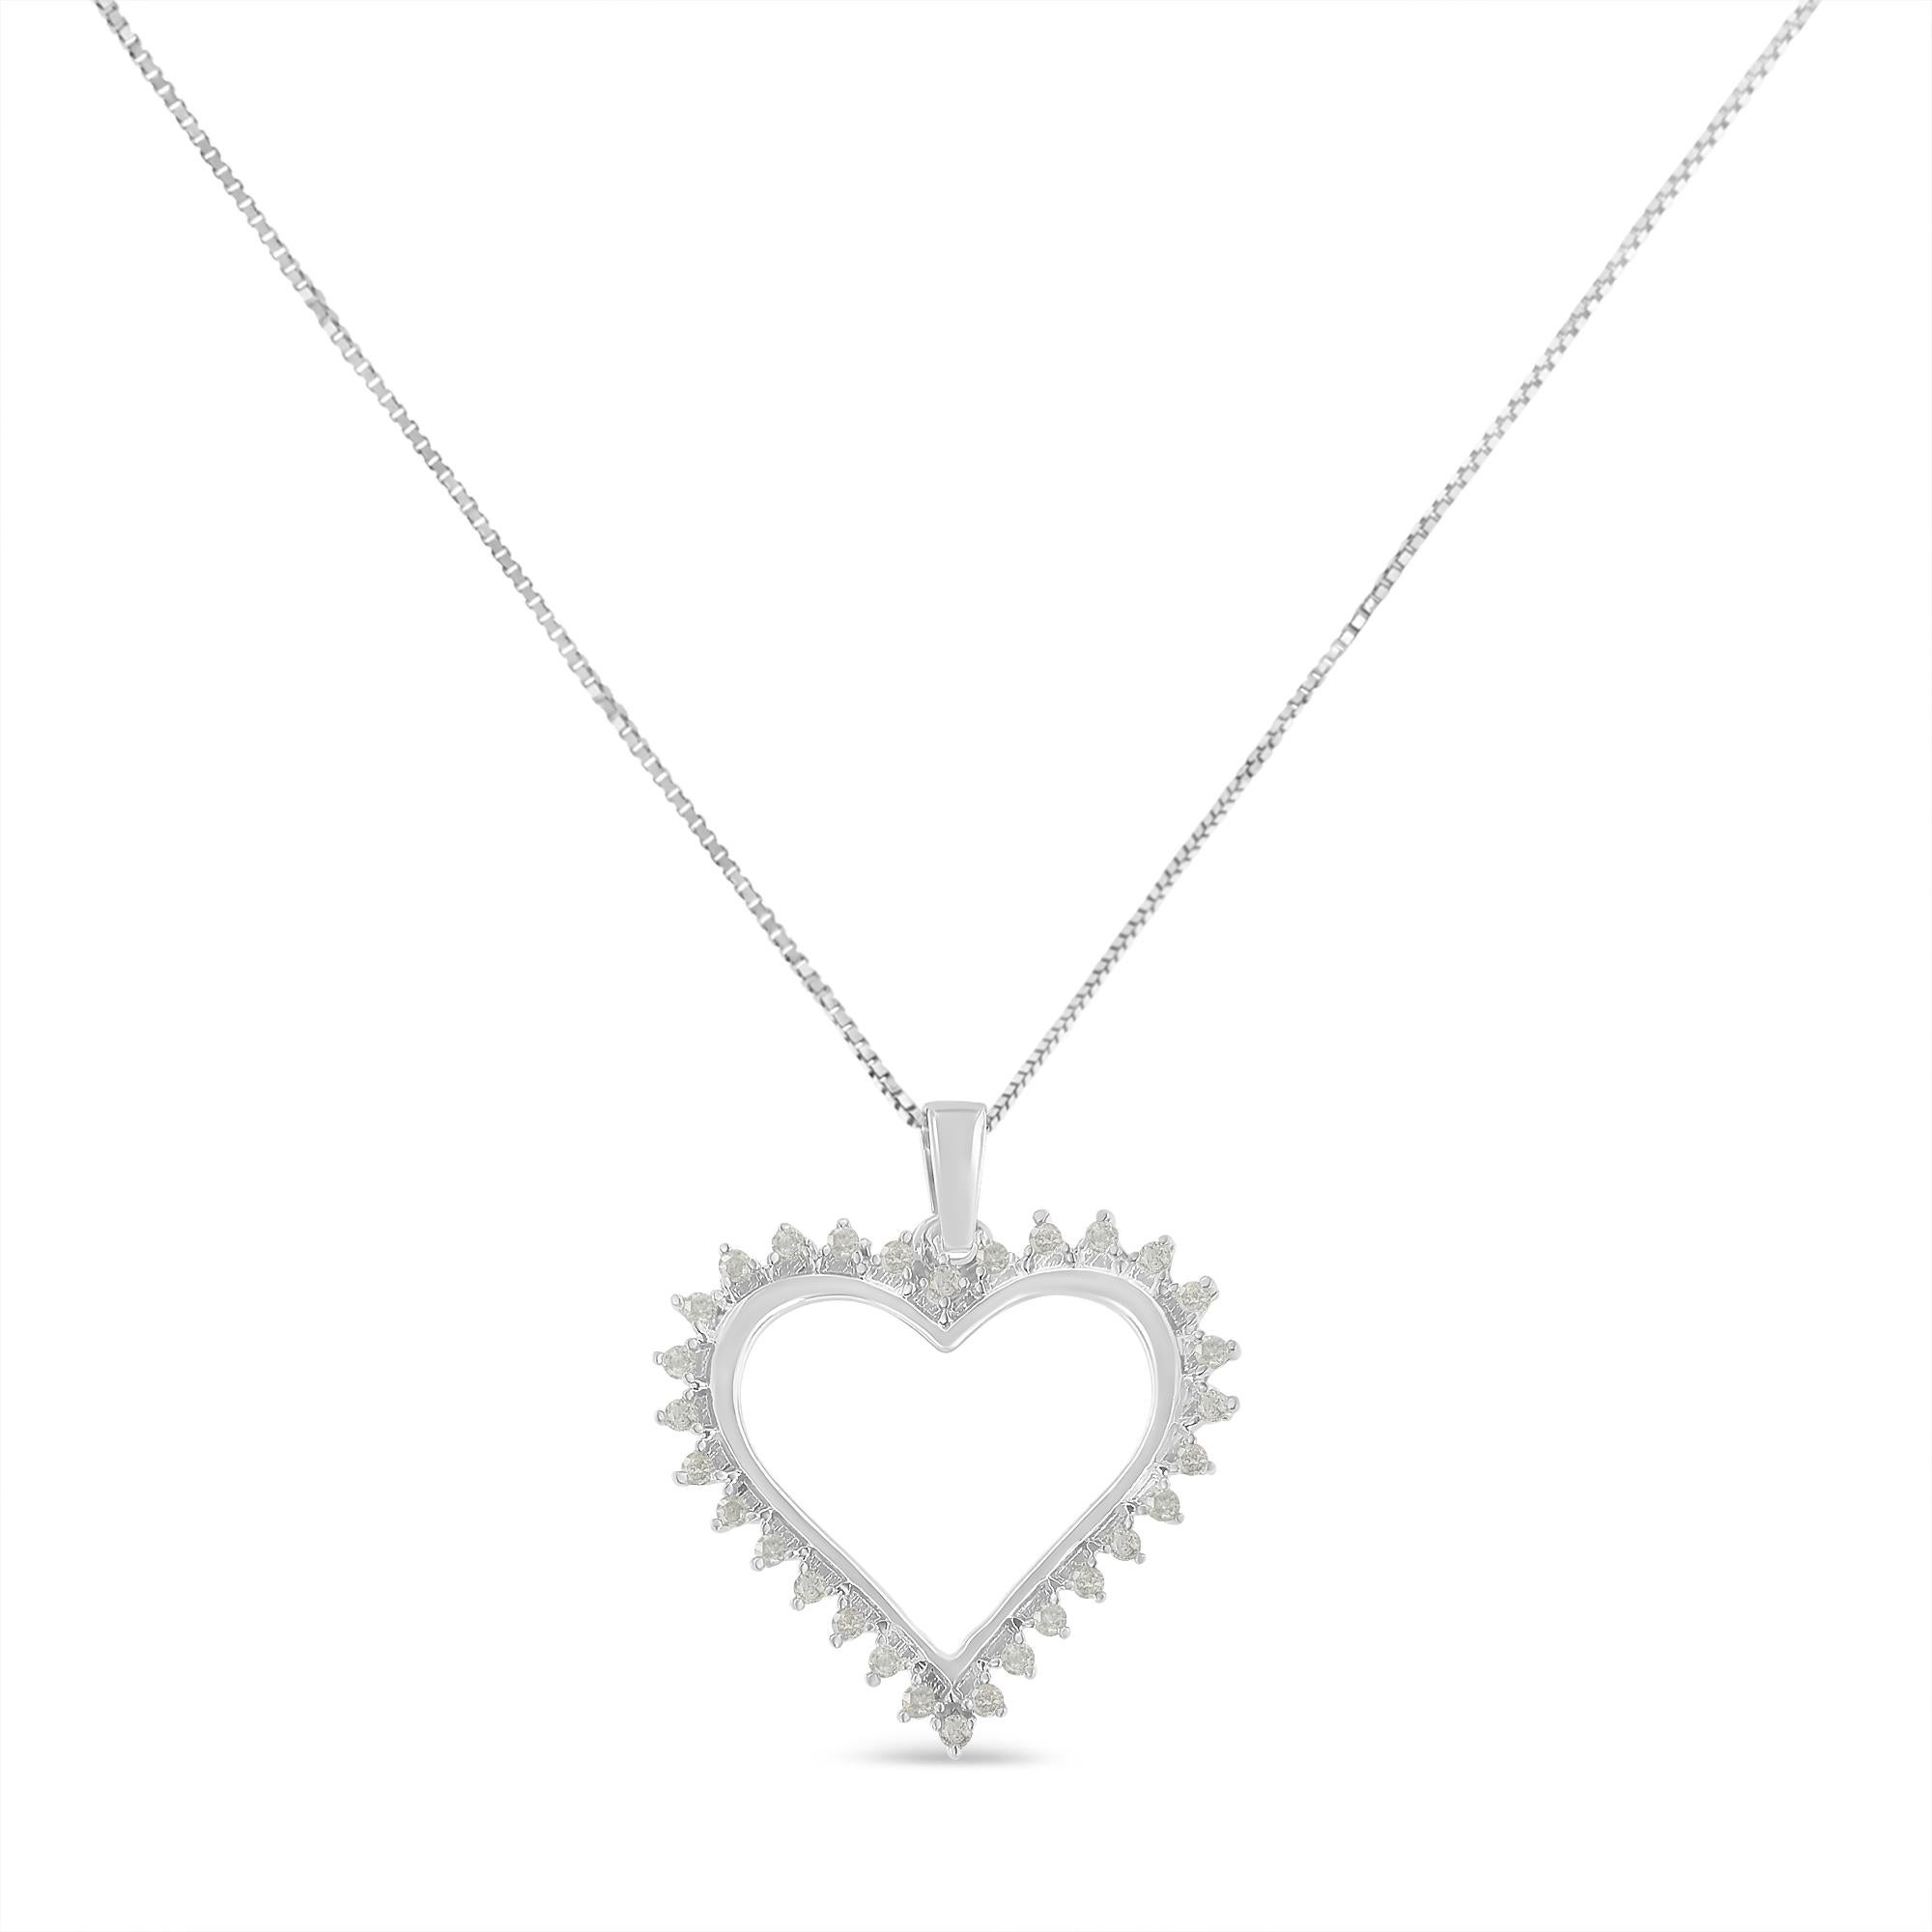 A shimmering halo of prong set, round cut diamonds sit around a lovely open heart pendant. 1/4ct TDW of diamonds sparkle in this sterling silver design. The pendant hangs from a box chain that secures with a spring ring clasp.

